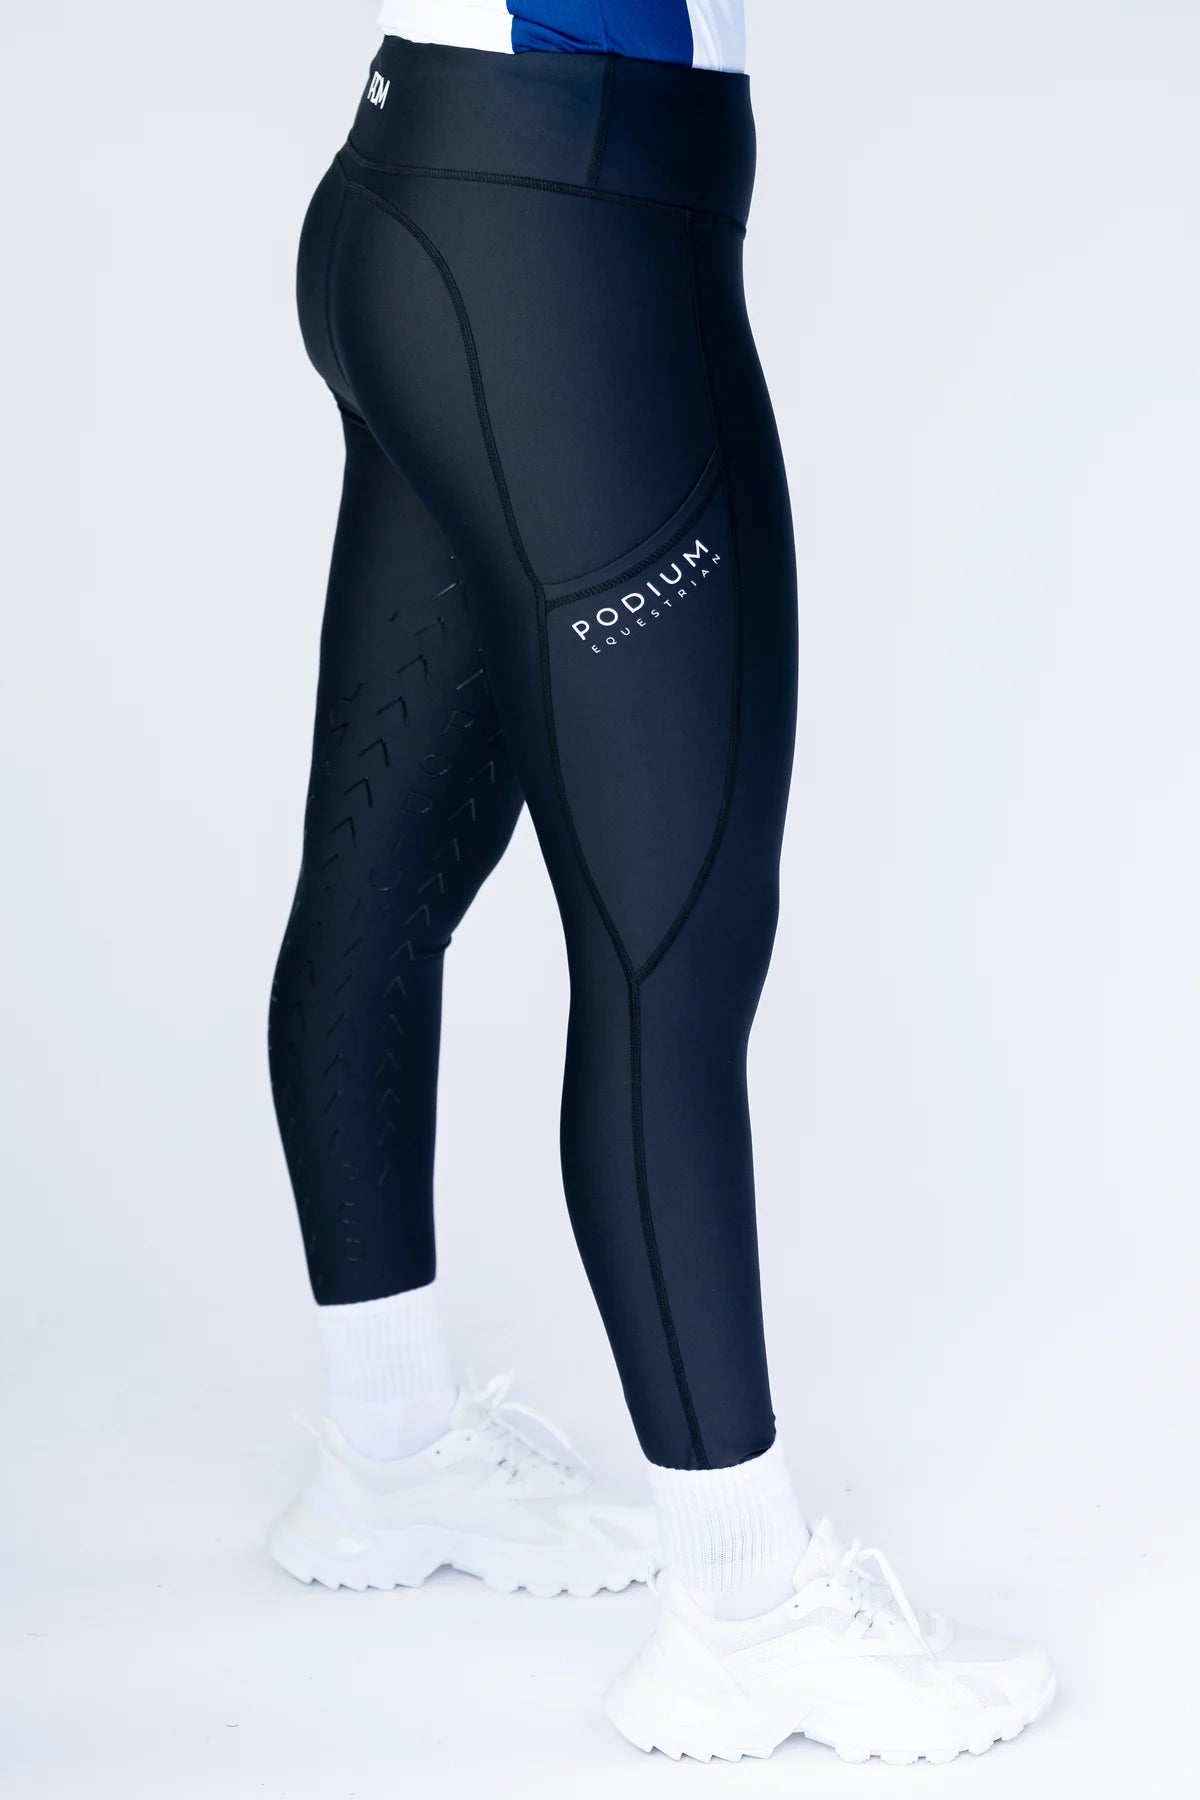 High Performance Horse Riding Tights with Pocket